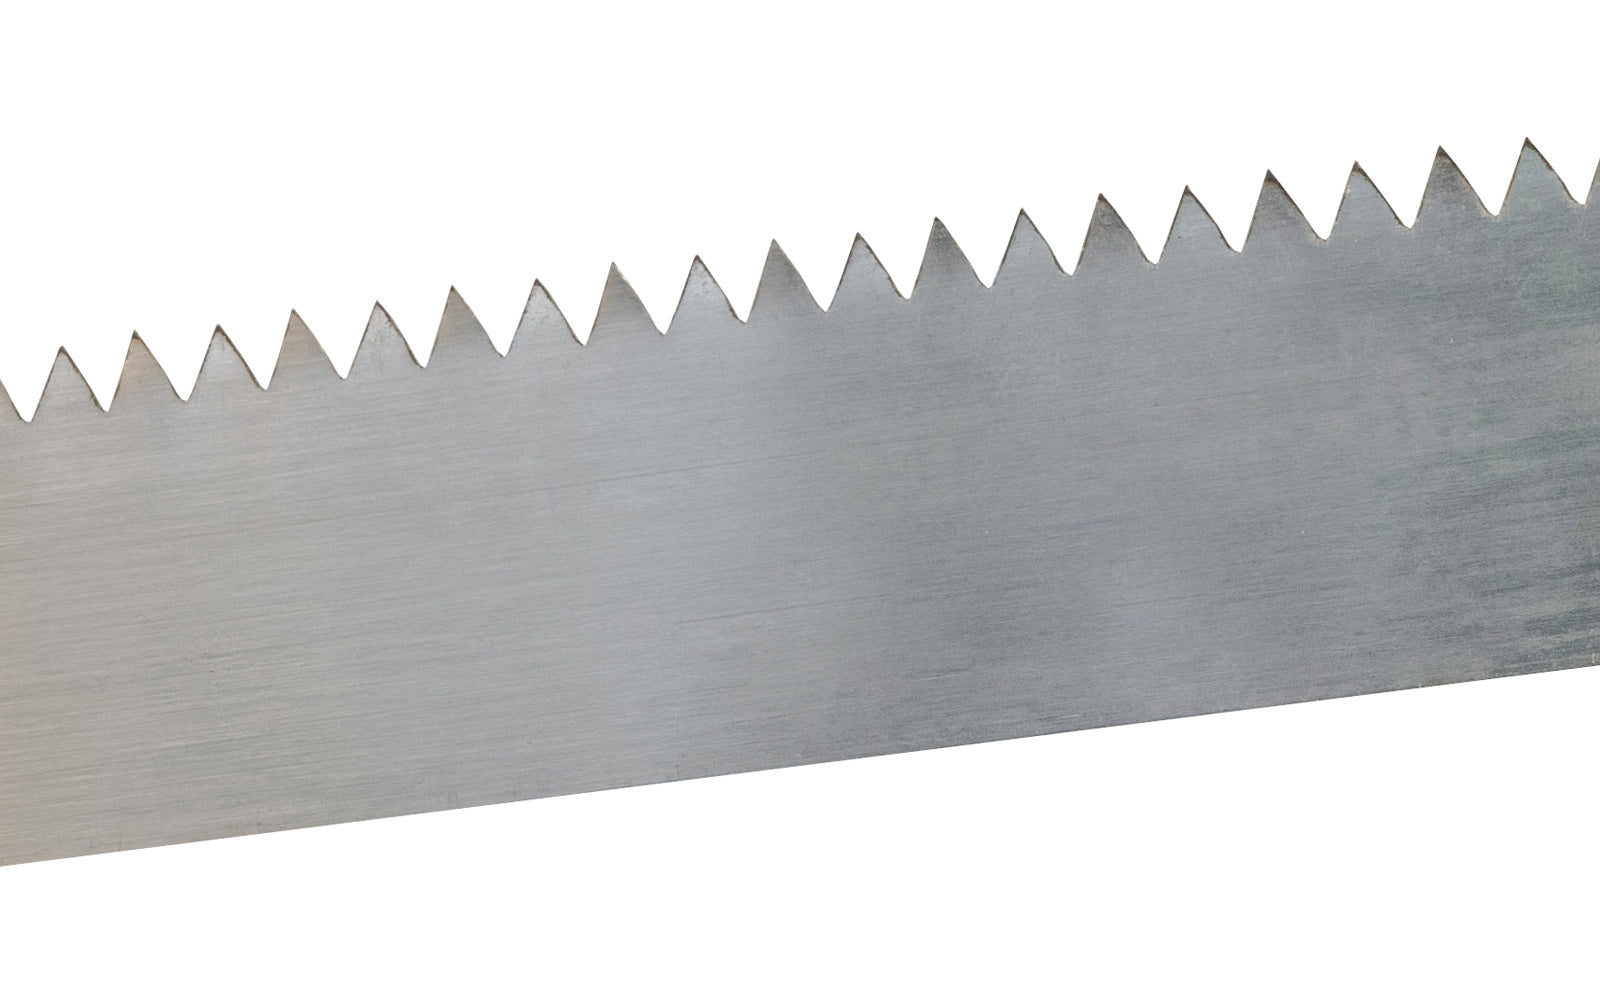 Ulmia Frame Saw Blade 5-1/2 TPI 600 mm Blade. A replacement saw blade made by Ulmia in Germany. Large saw teeth with slight push-to-cut orientation for coarser cuts. For cutting boards, square edged timber, round wood & firewood. Replacement blade for Ulmia web saw. Made in Germany.